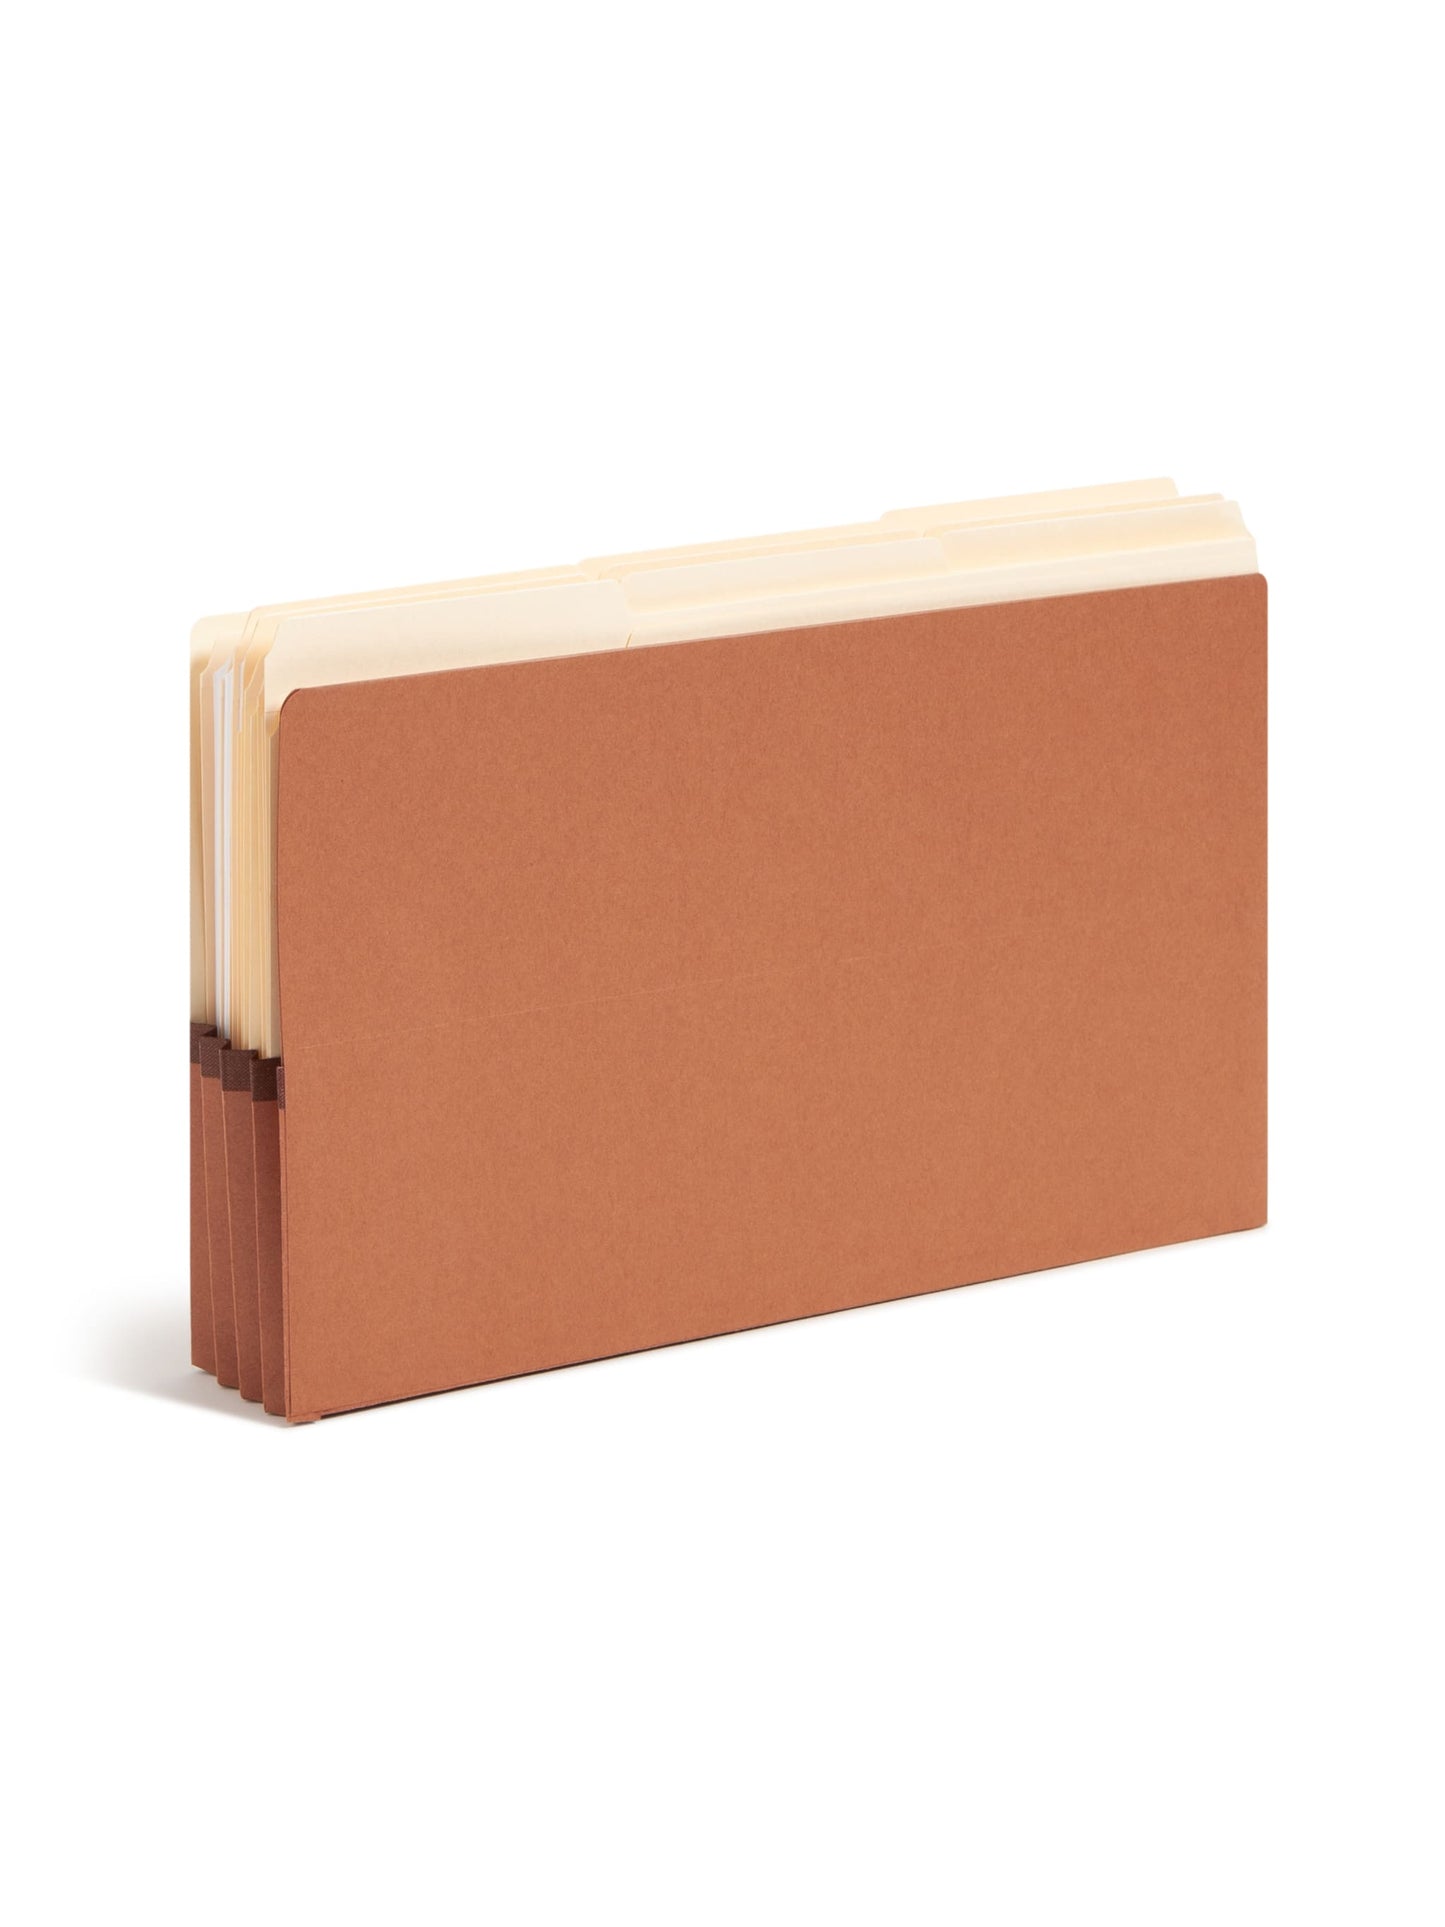 Reinforced End Tab File Pockets, 4 inch High Tab, 3-1/2 inch Expansion, Redrope Color, Legal Size, Set of 0, 30086486746244